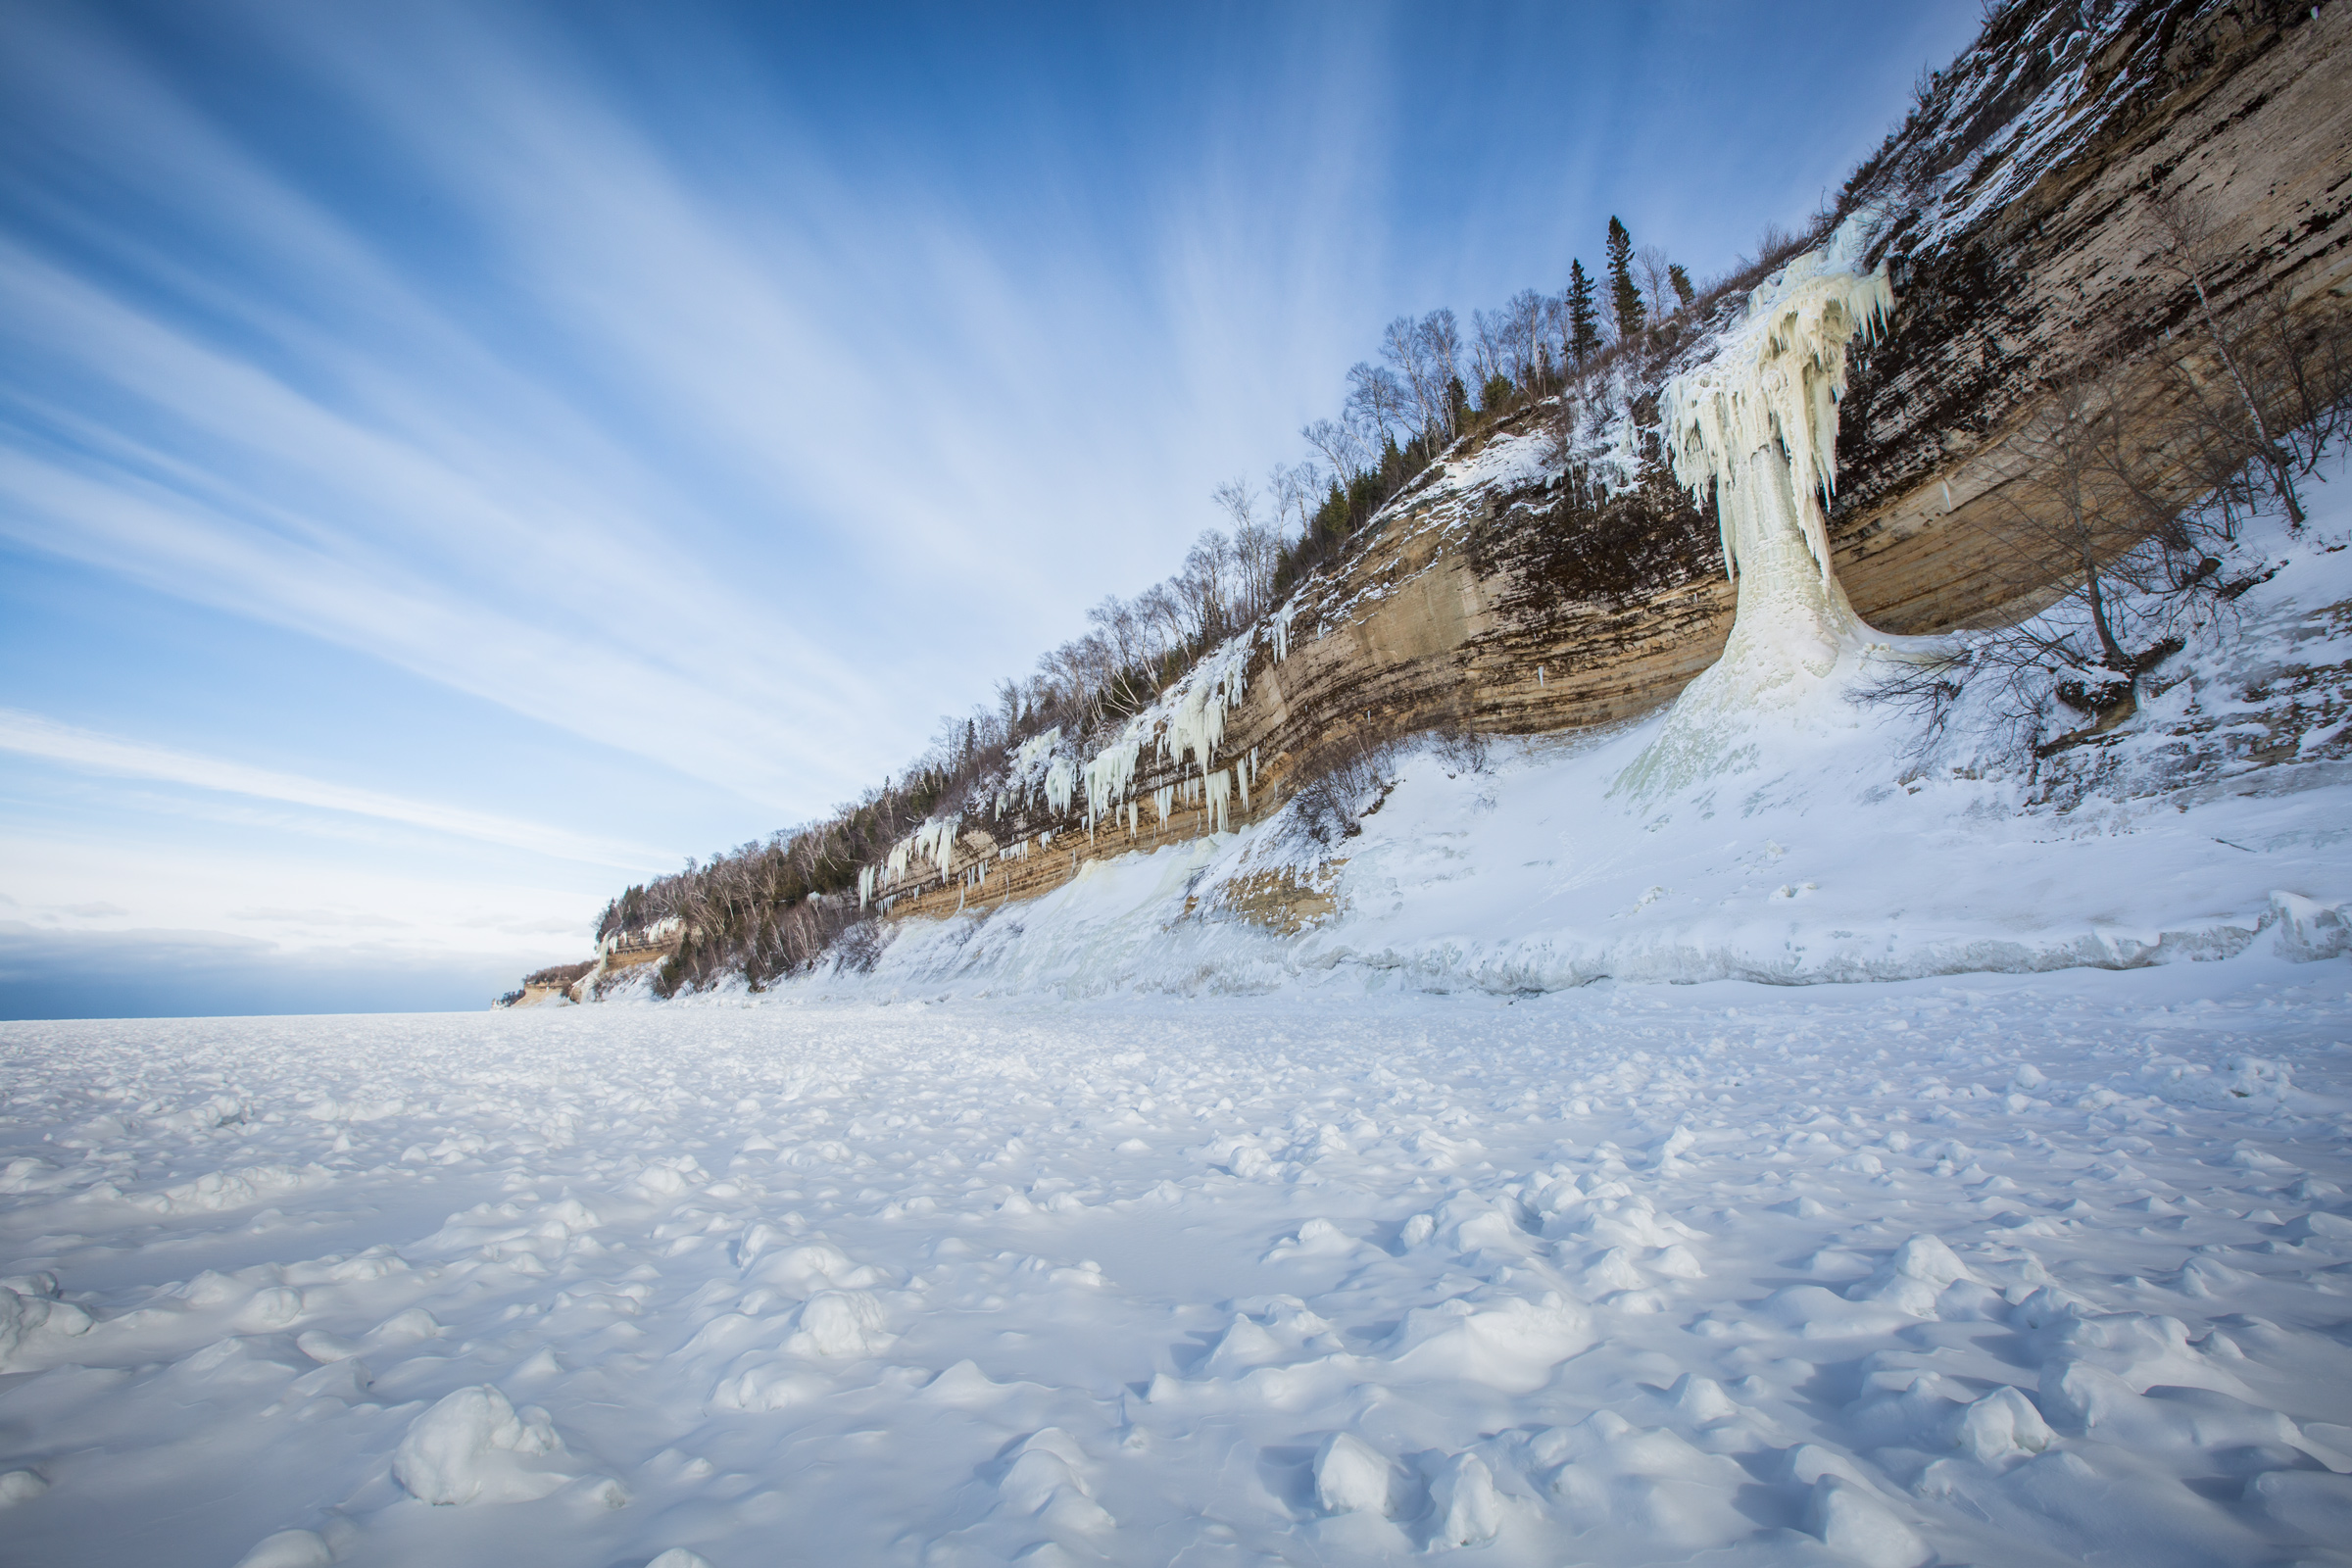  One of the largest and most notable ice climbing routes along the Michigan lakeshore, “Dairyland.” 